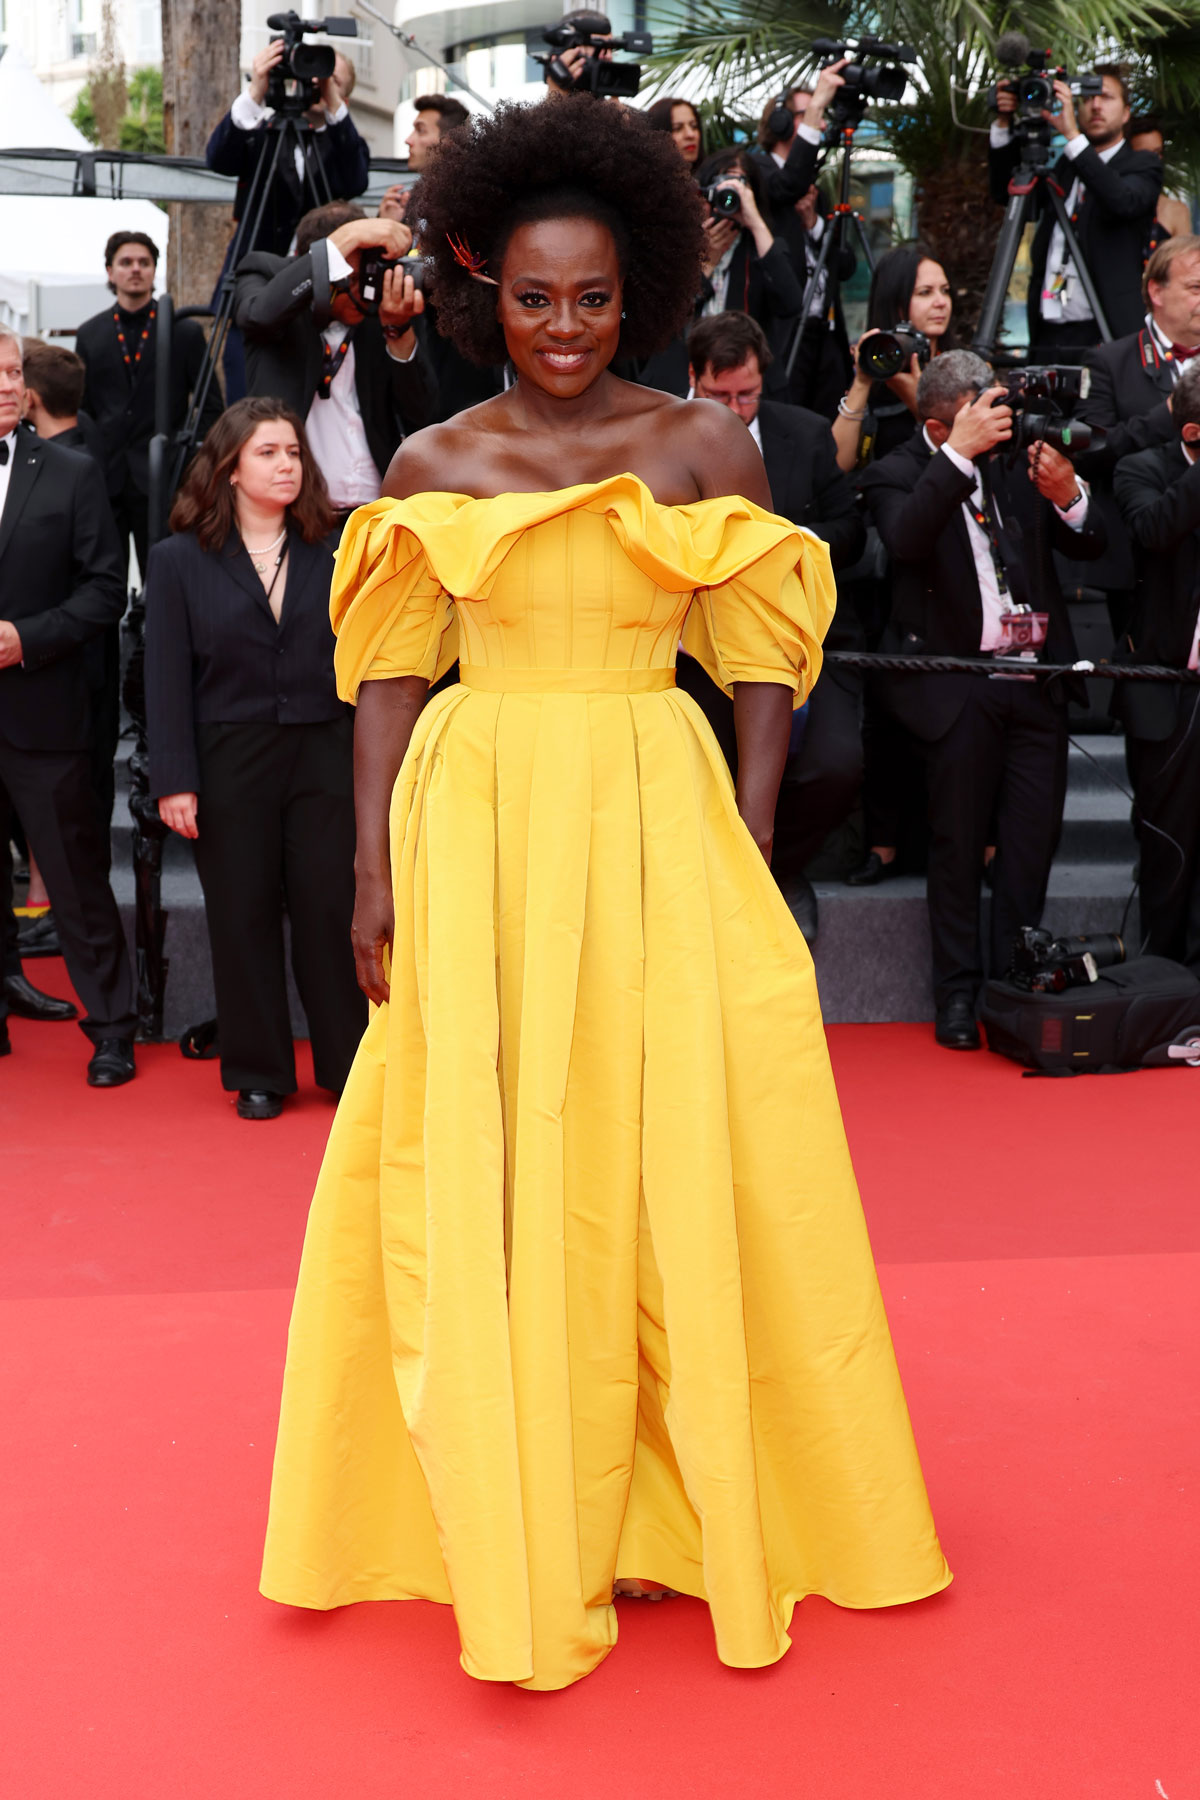 Viola Davis wearing a yellow off-the-shoulder gown at the Cannes Film Festival.